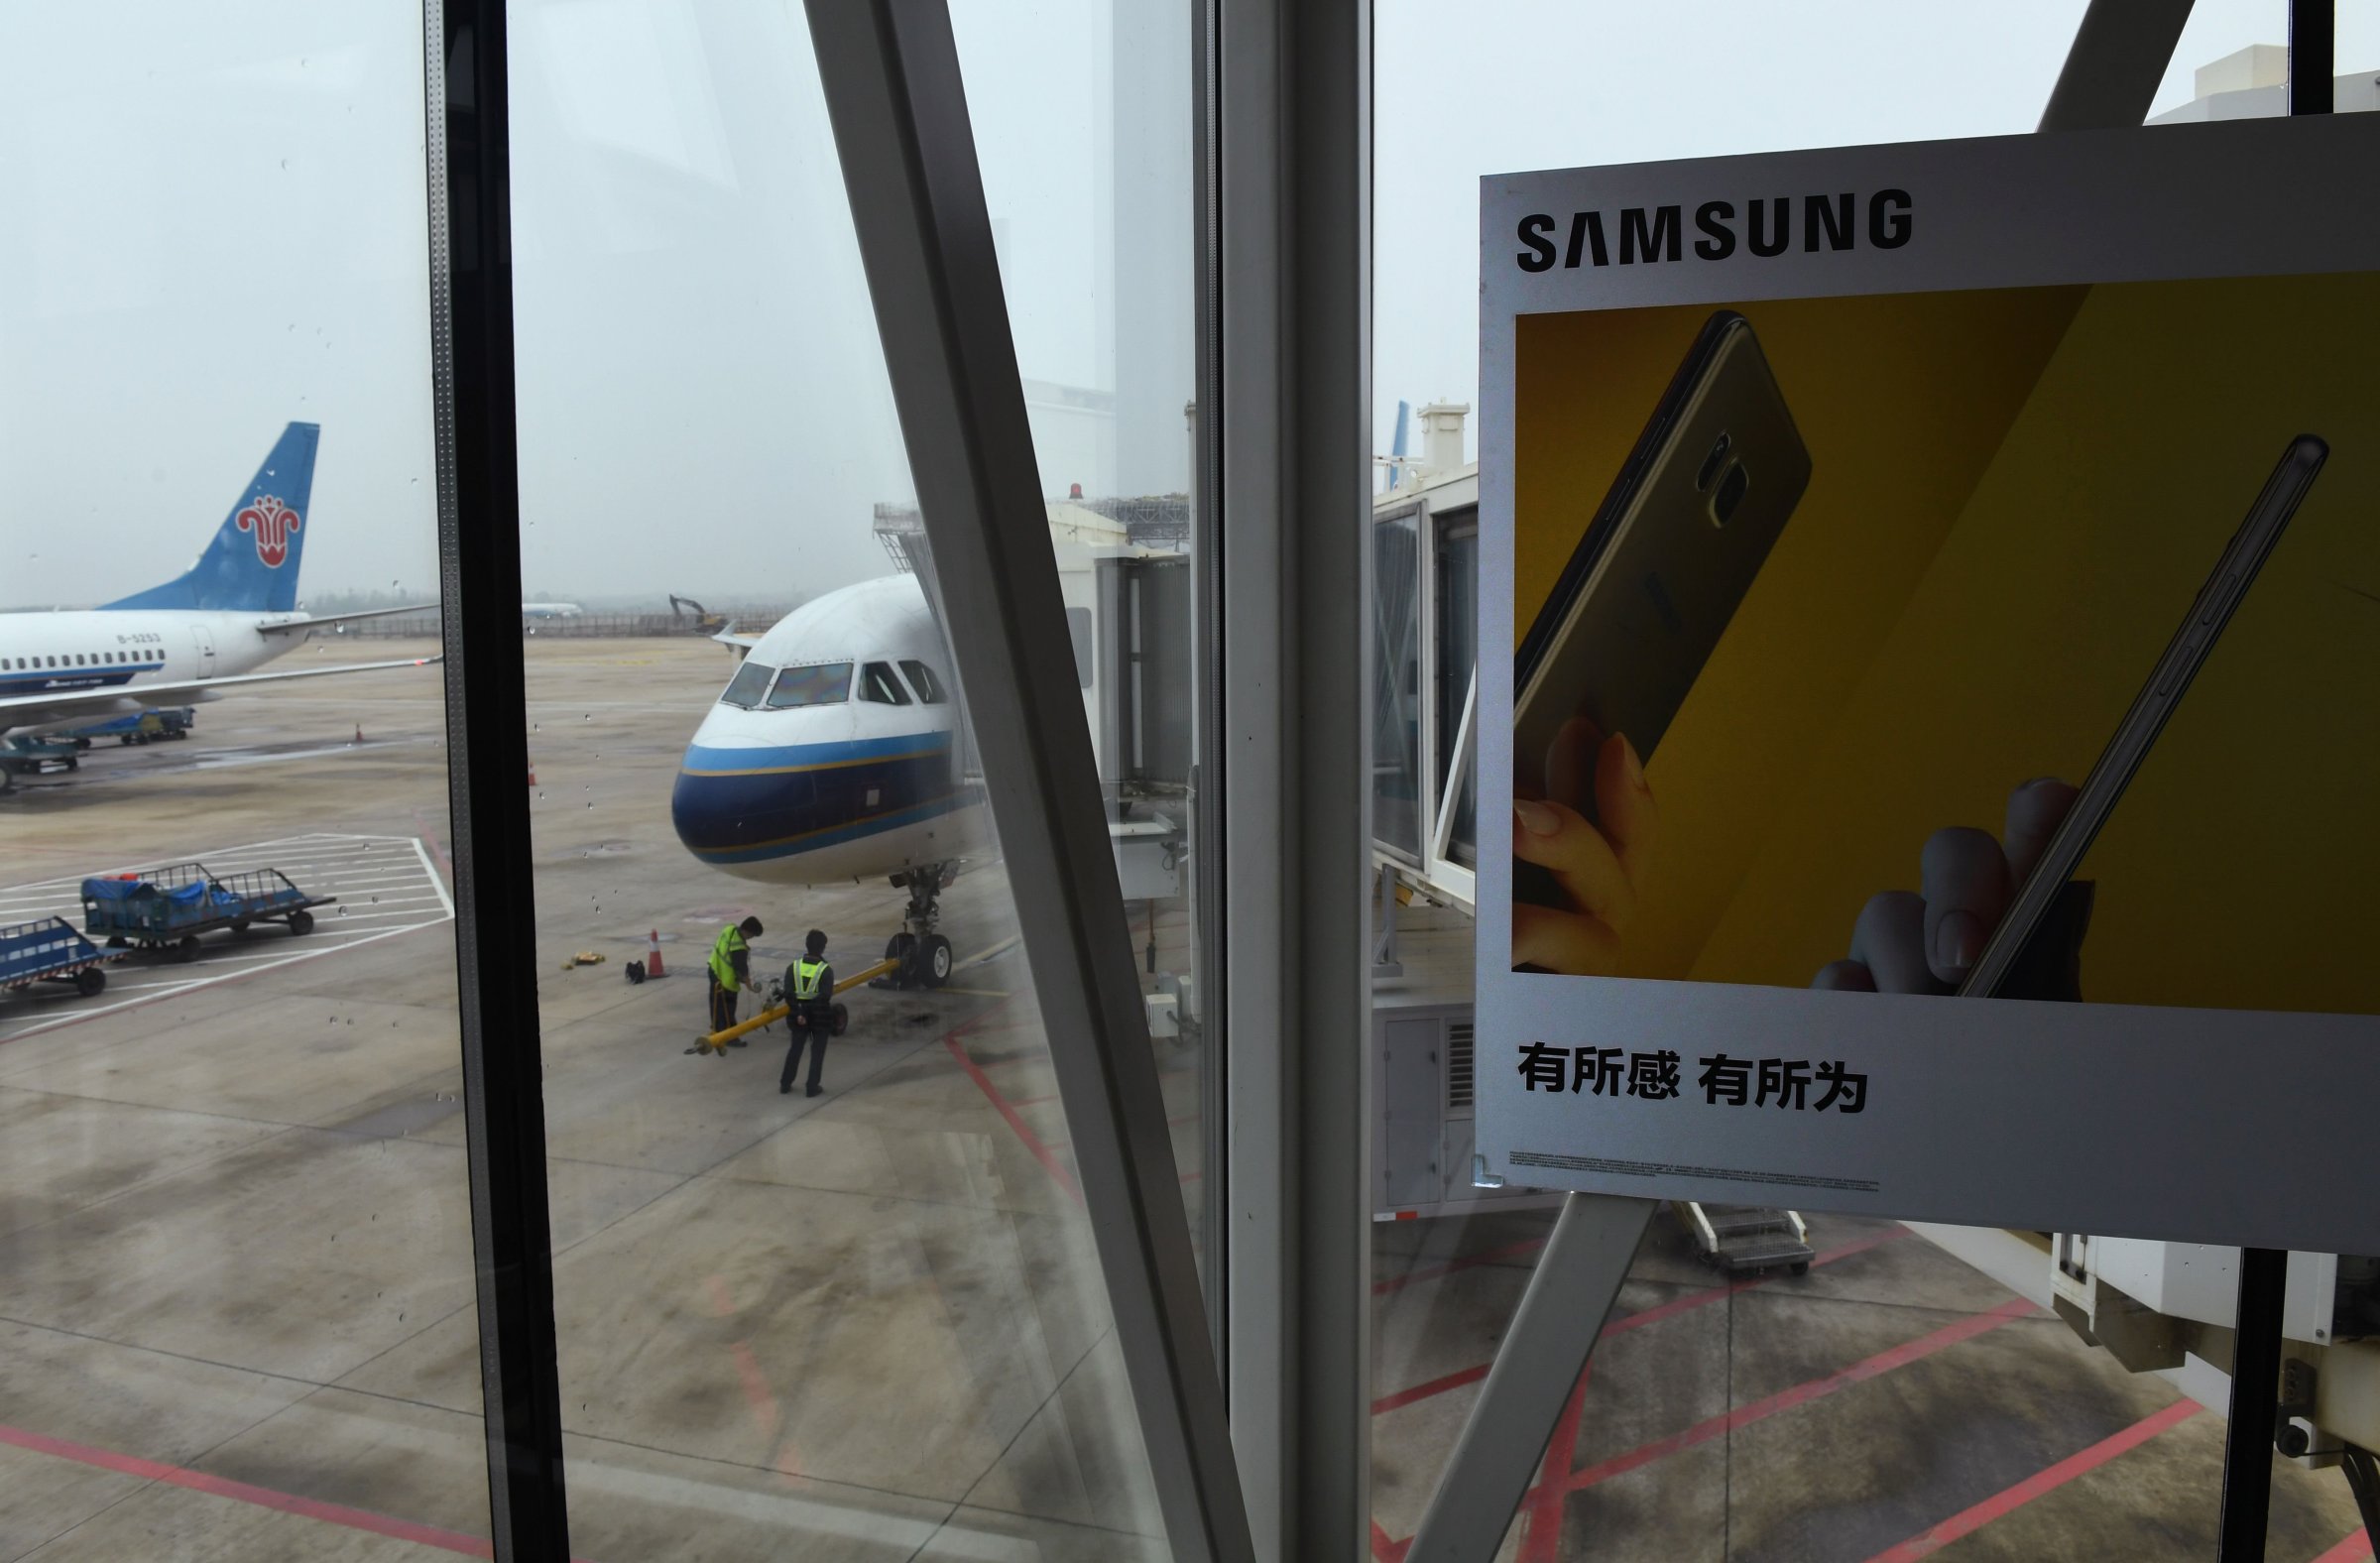 An advertisement for the Samsung Galaxy Note 7 smartphone is seen on an air bridge leading to a plane at the airport in Wuhan, in China's central Hubei province on October 2, 2016. Signs at the Wuhan airport check-in counters warn passengers not to switch on or charge Note 7 smartphones on the plane and ban them from check-in luggage. The warnings follow Samsung's recall of Note 7 phones after cases of batteries catching fire were reported in the US. / AFP PHOTO / GREG BAKERGREG BAKER/AFP/Getty Images